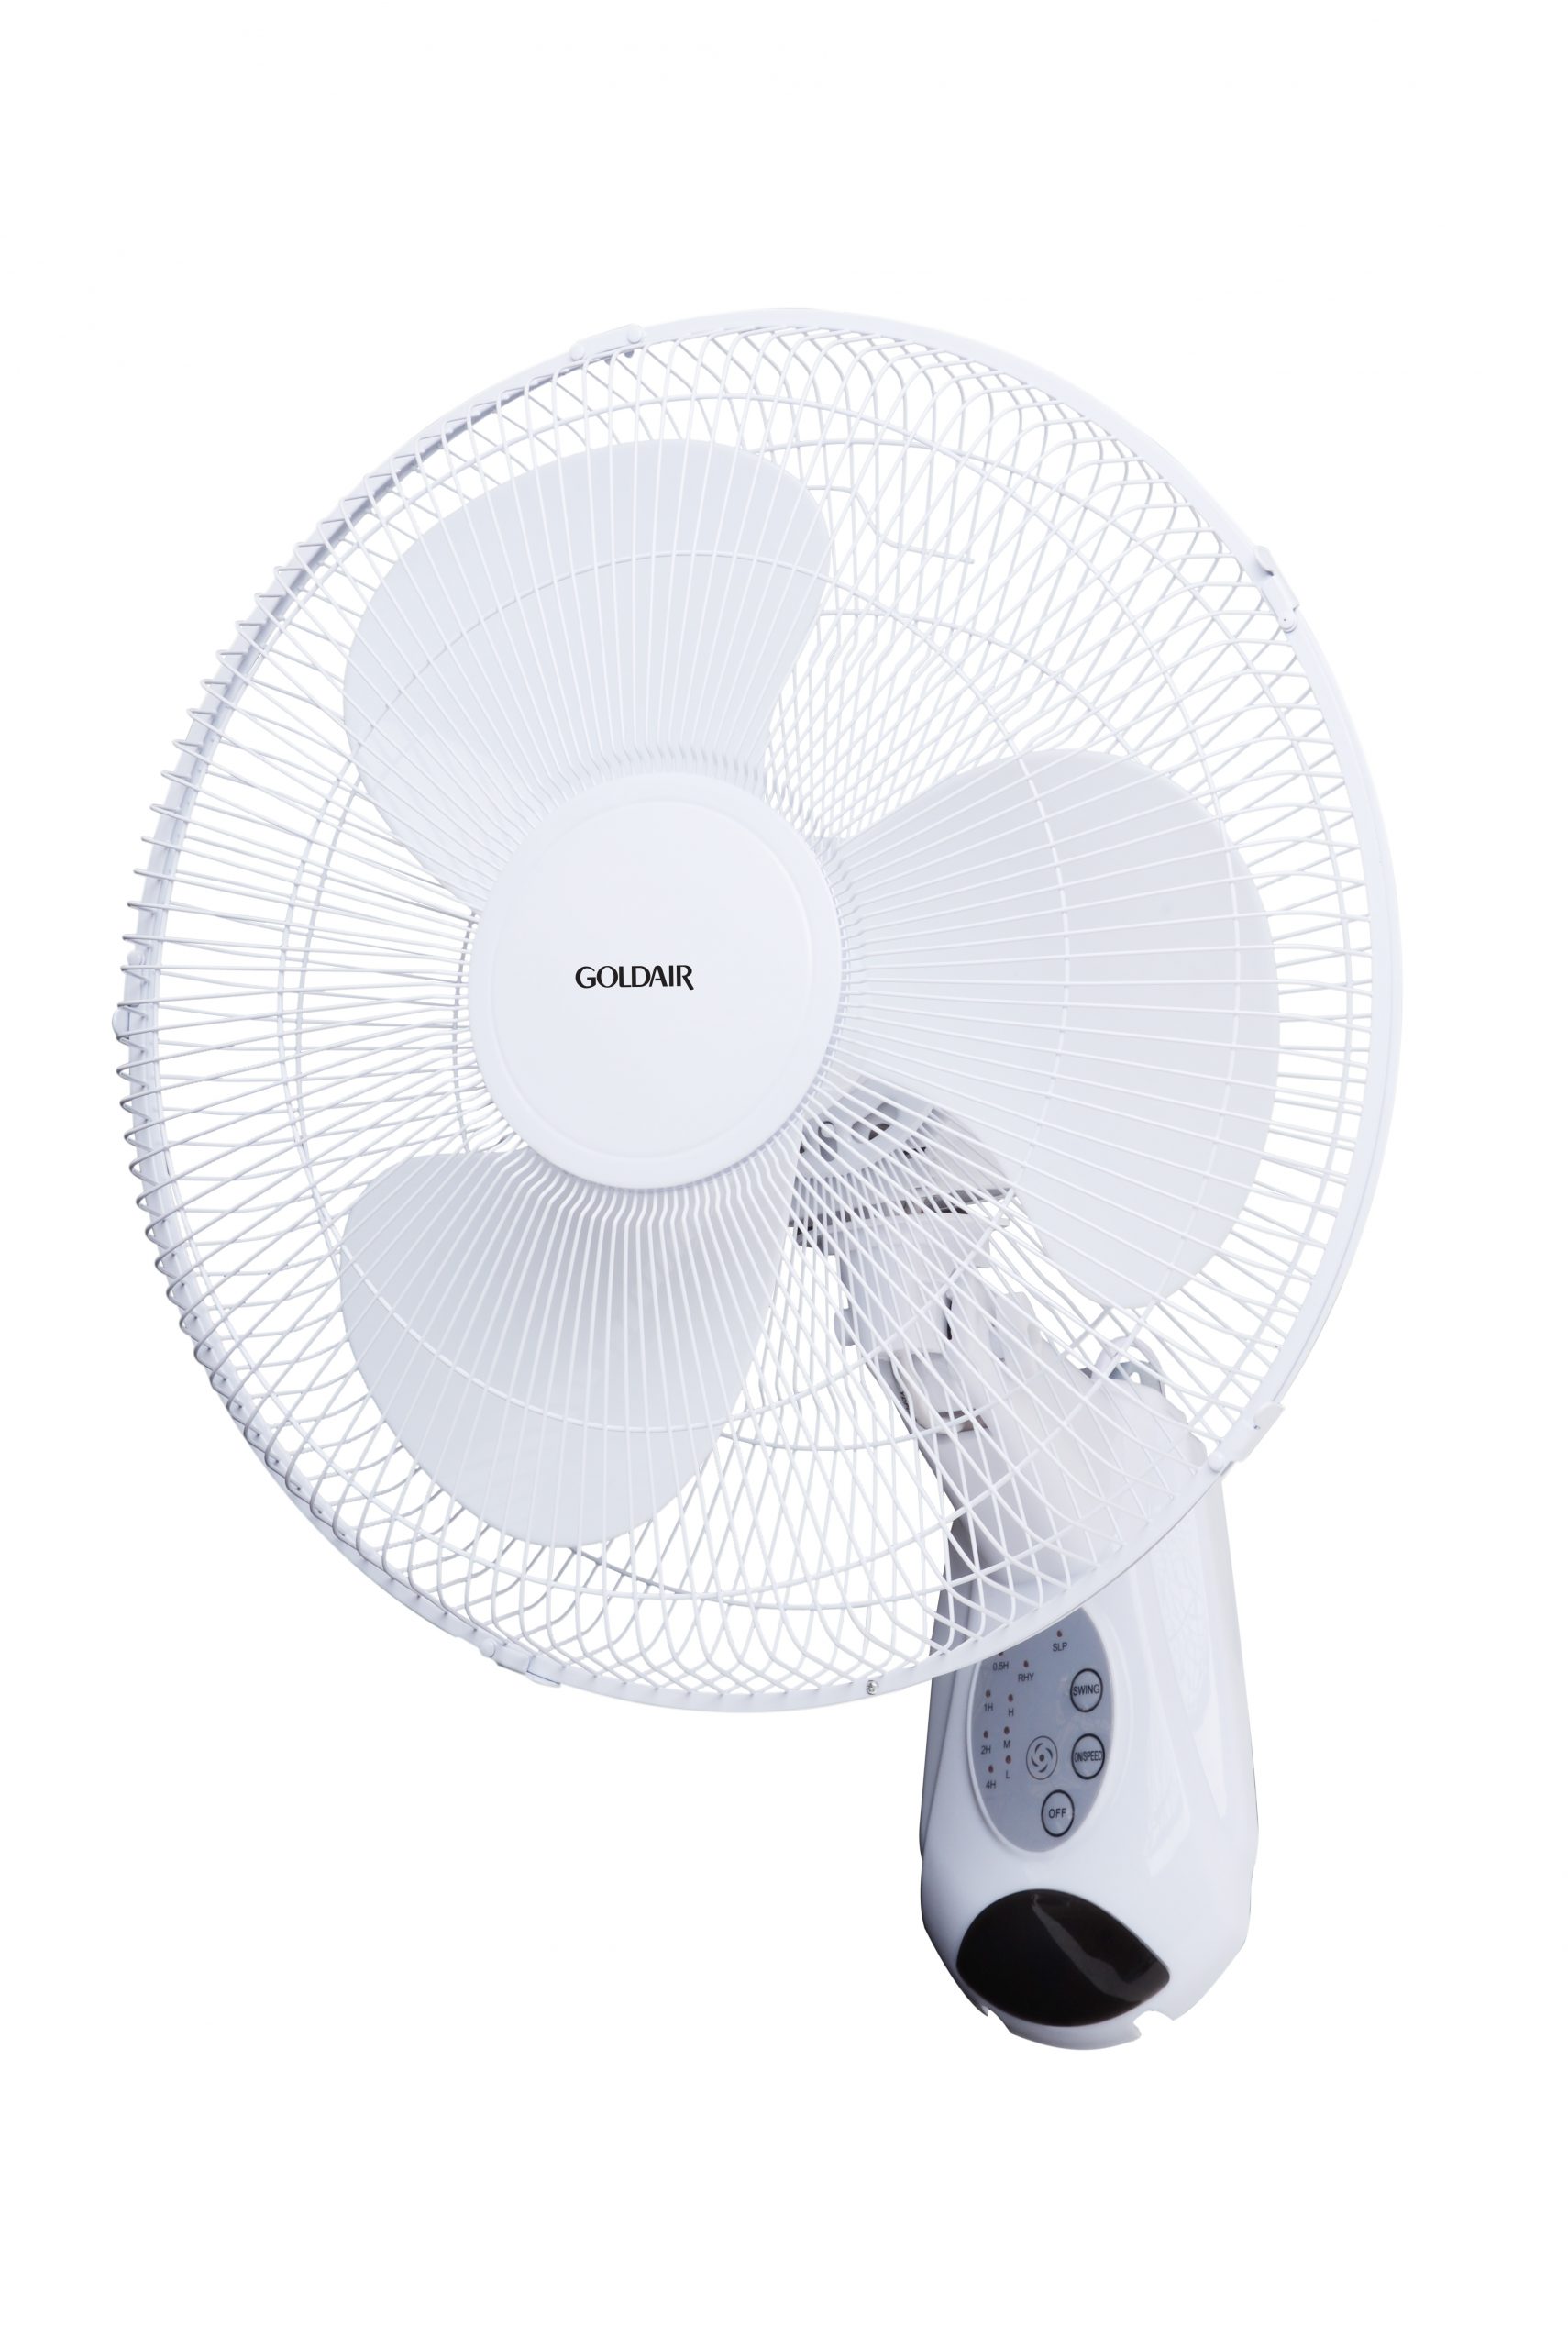 40cm Wall Fan Gswf40r Goldair intended for size 4016 X 6012